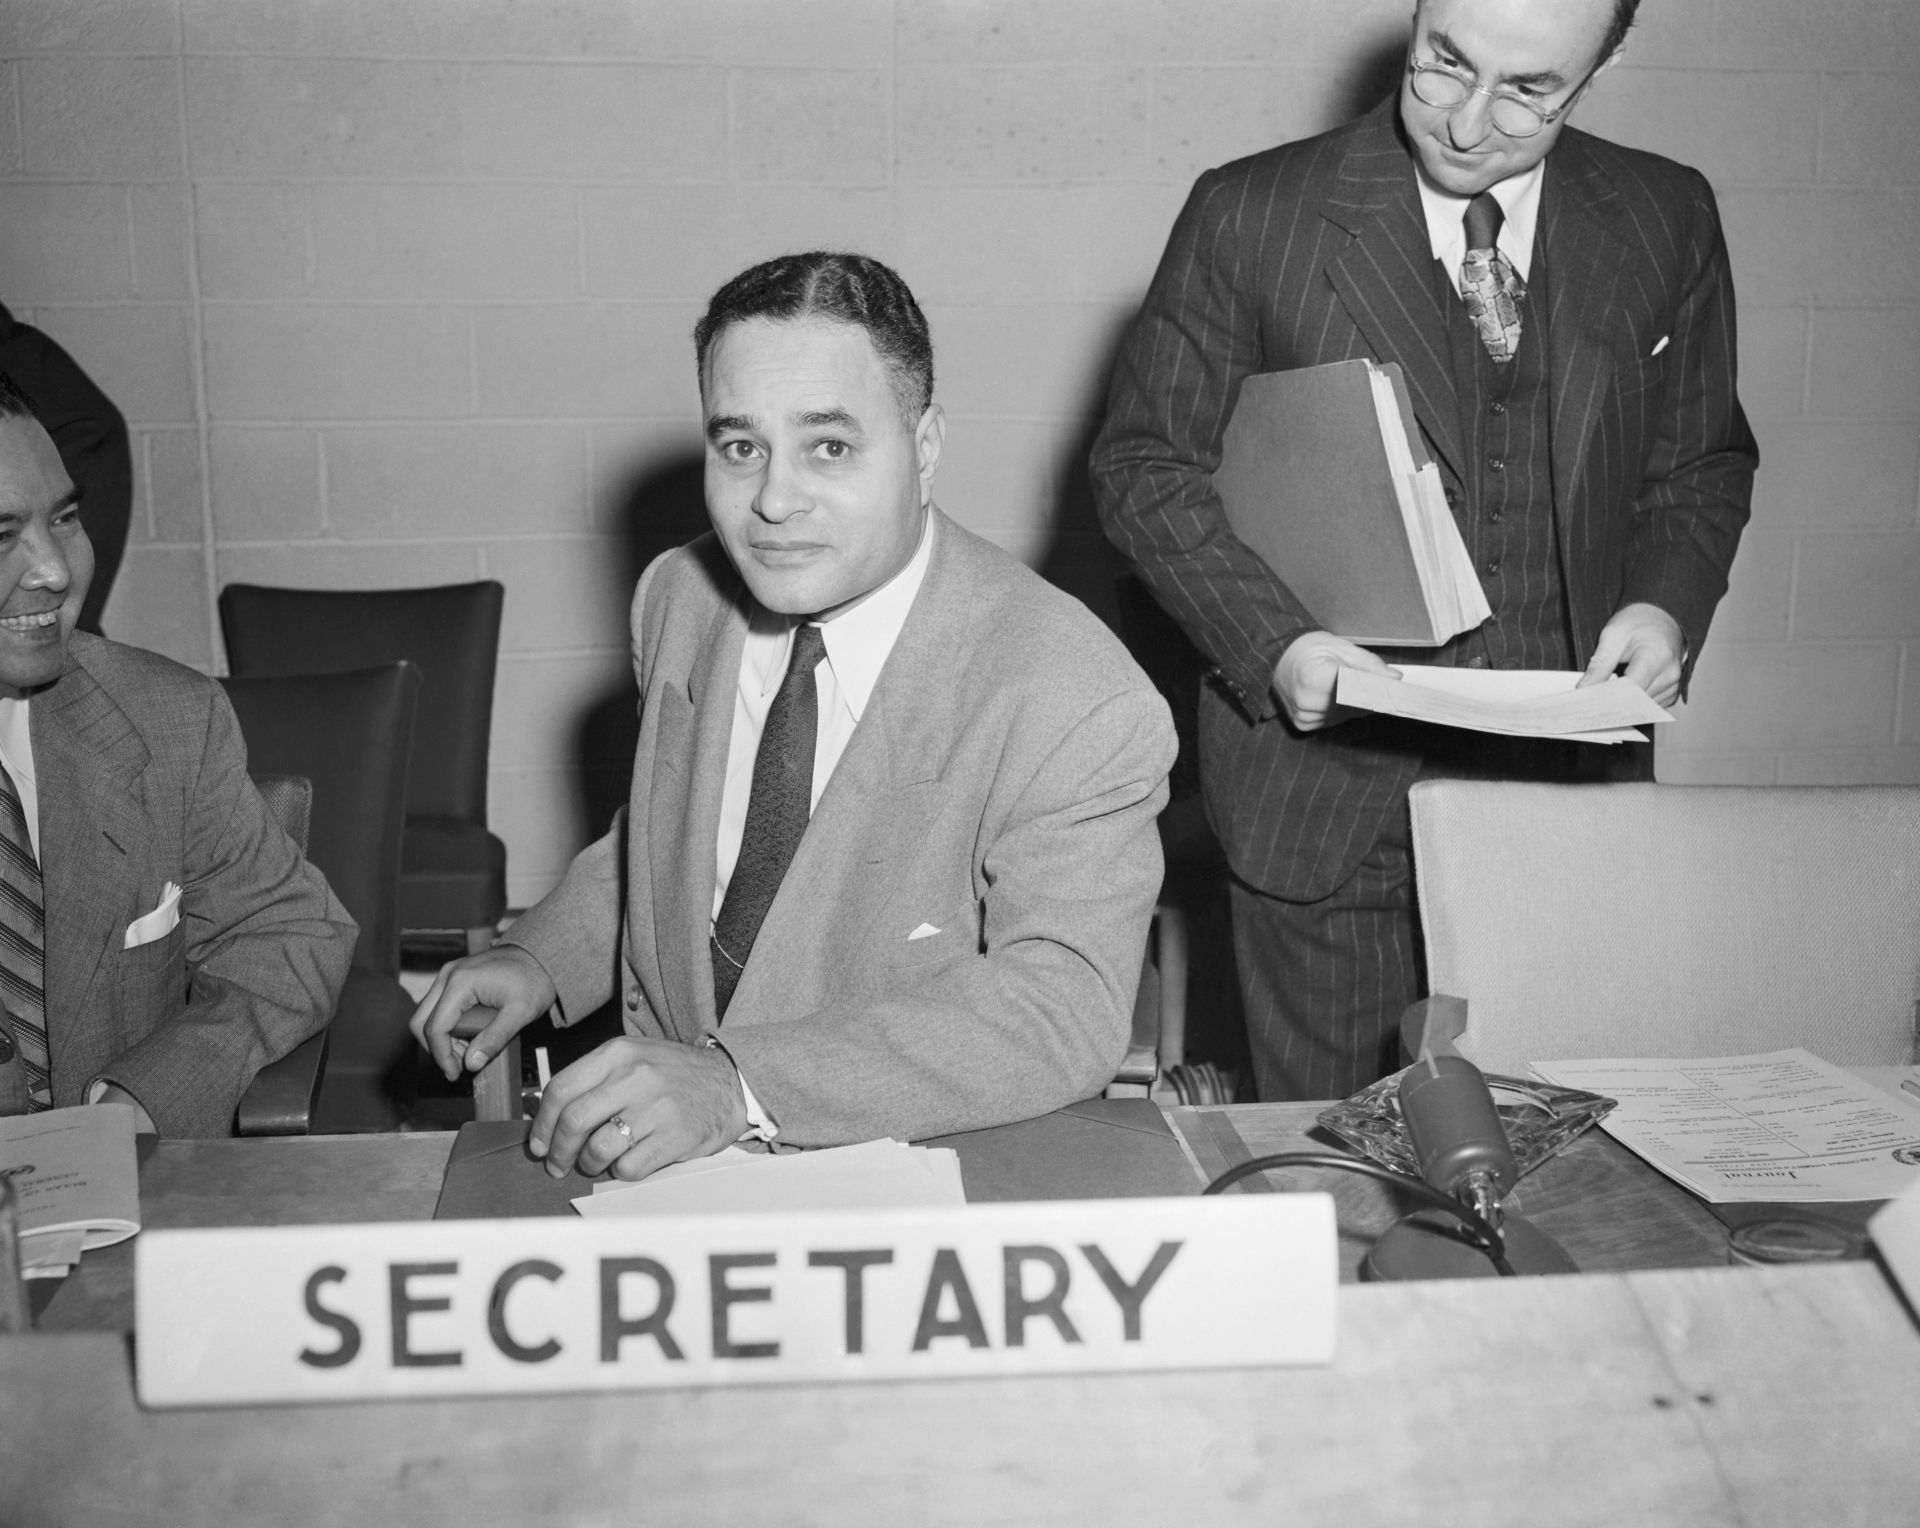 The African-American Diplomat Who Helped End the Imperial Order